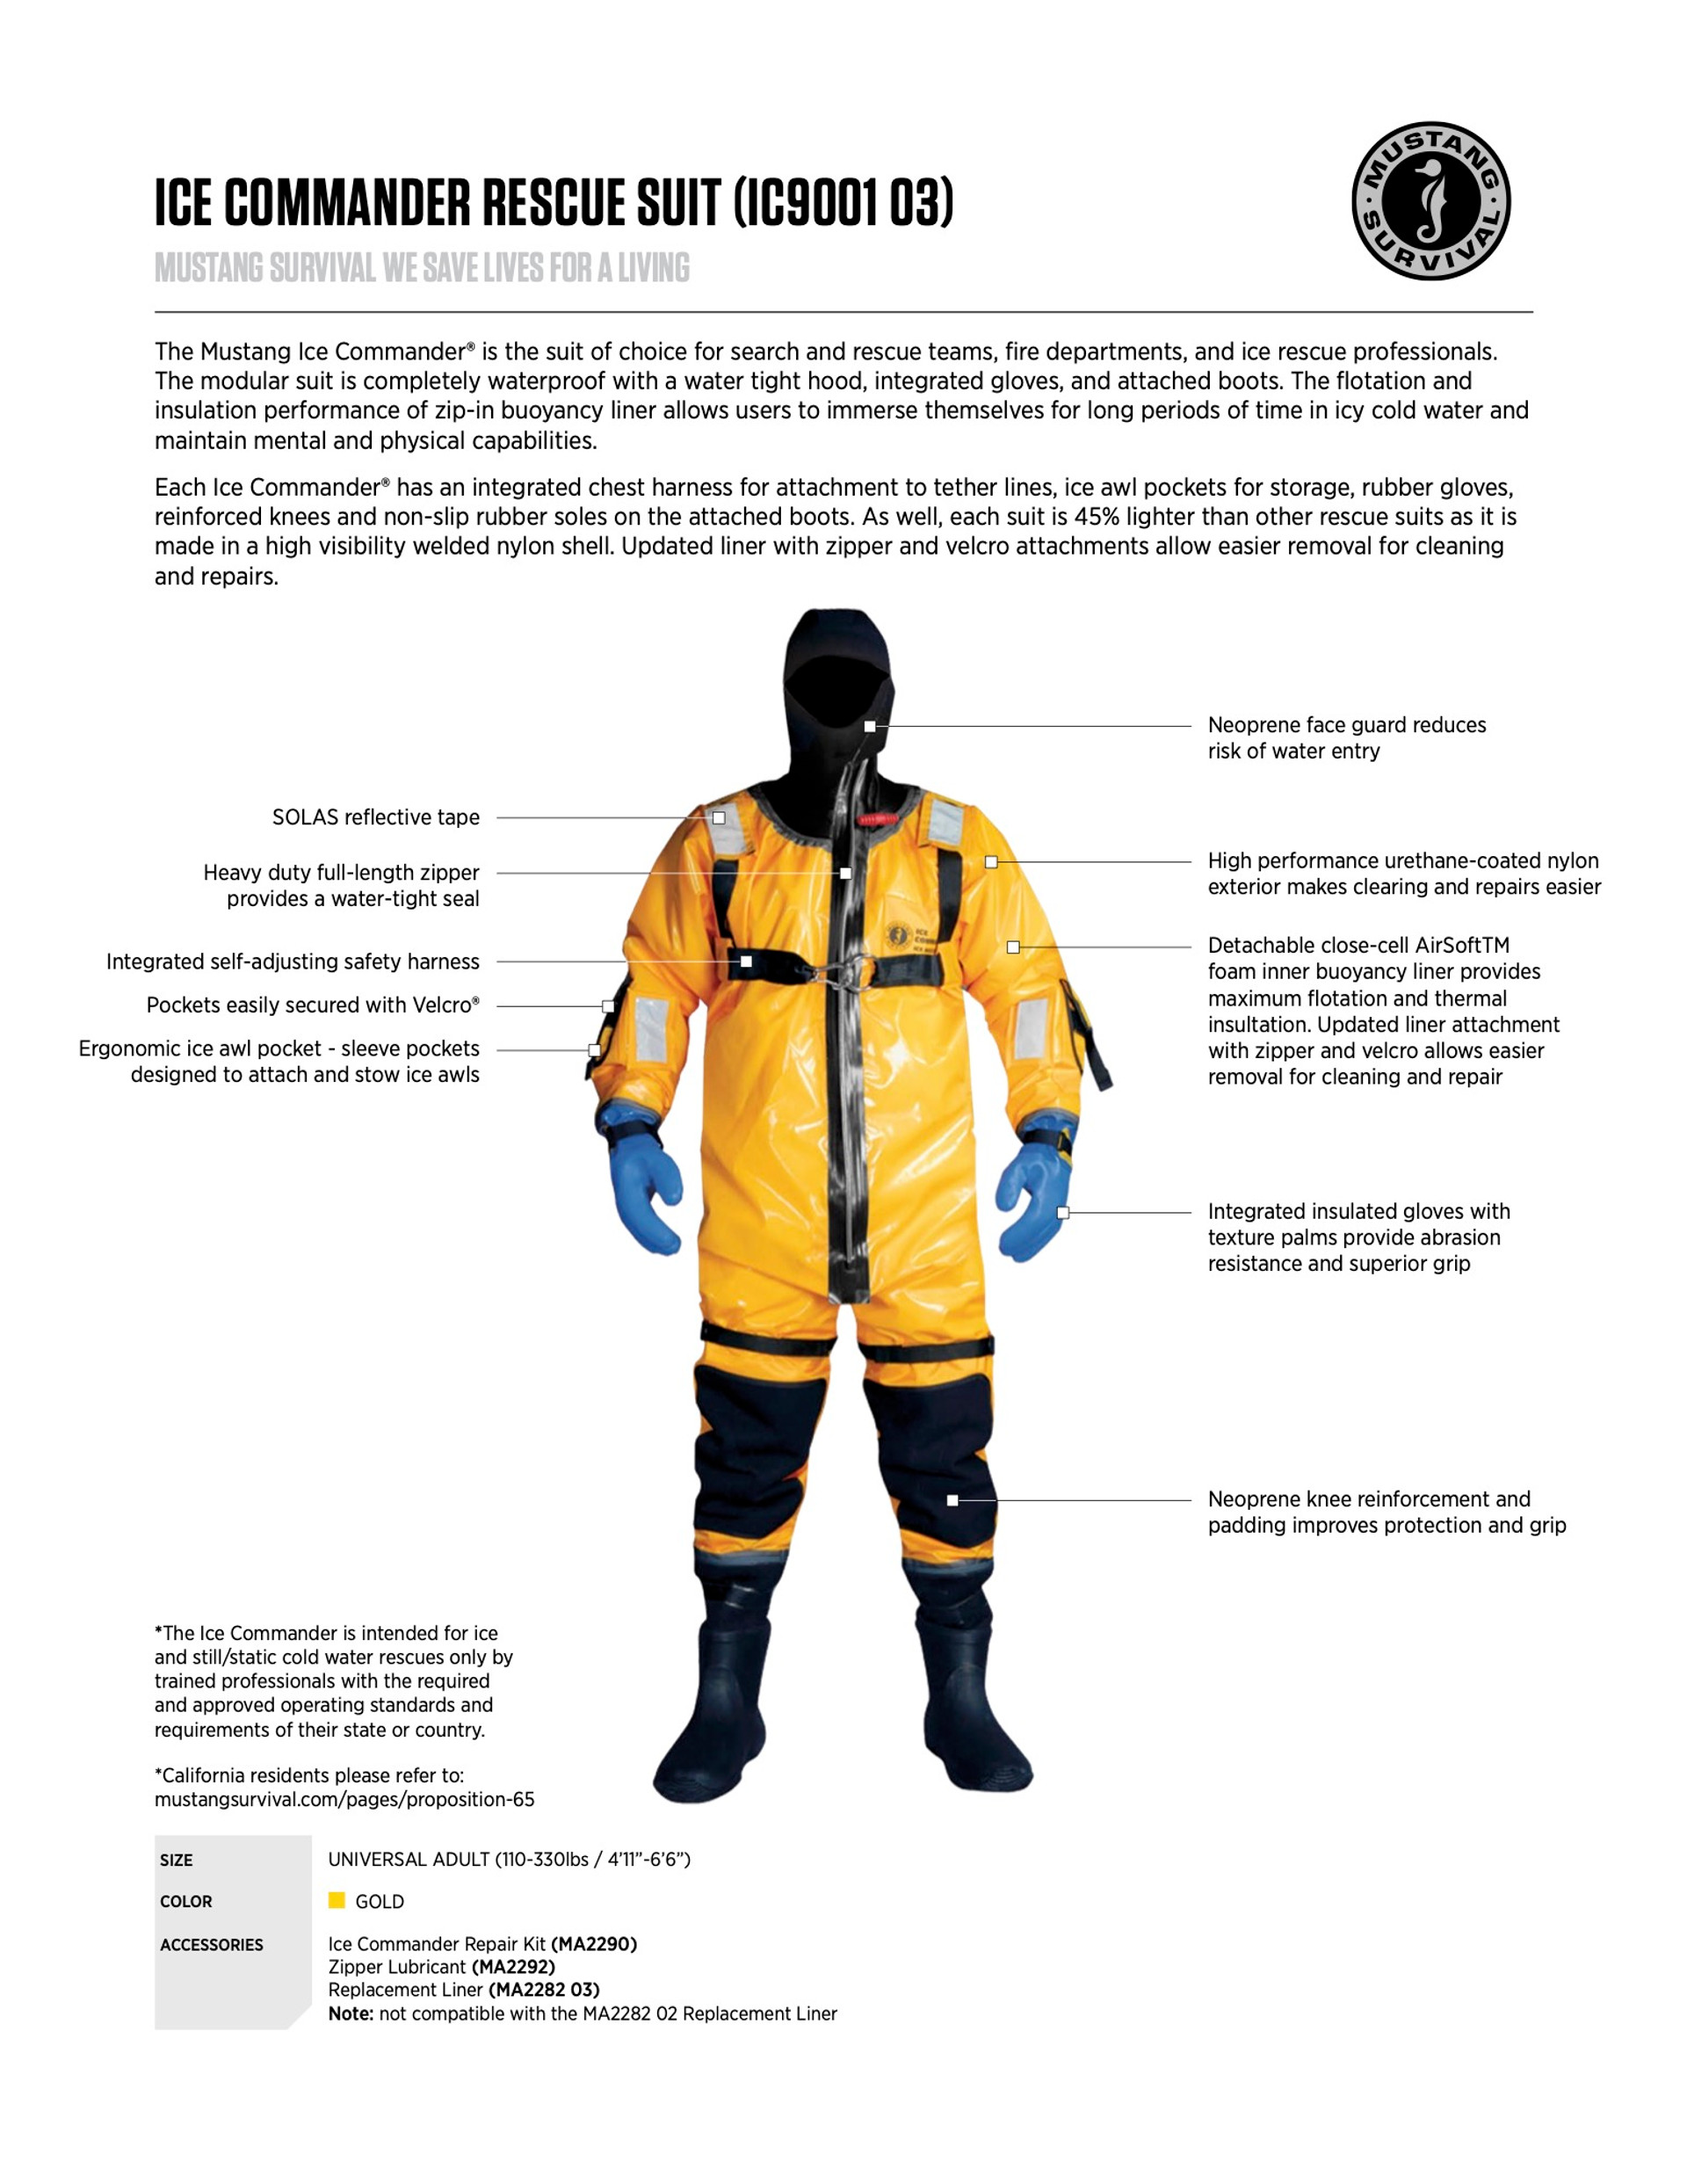 Mustang Ice Commander Rescue Suit | Live Action Safety